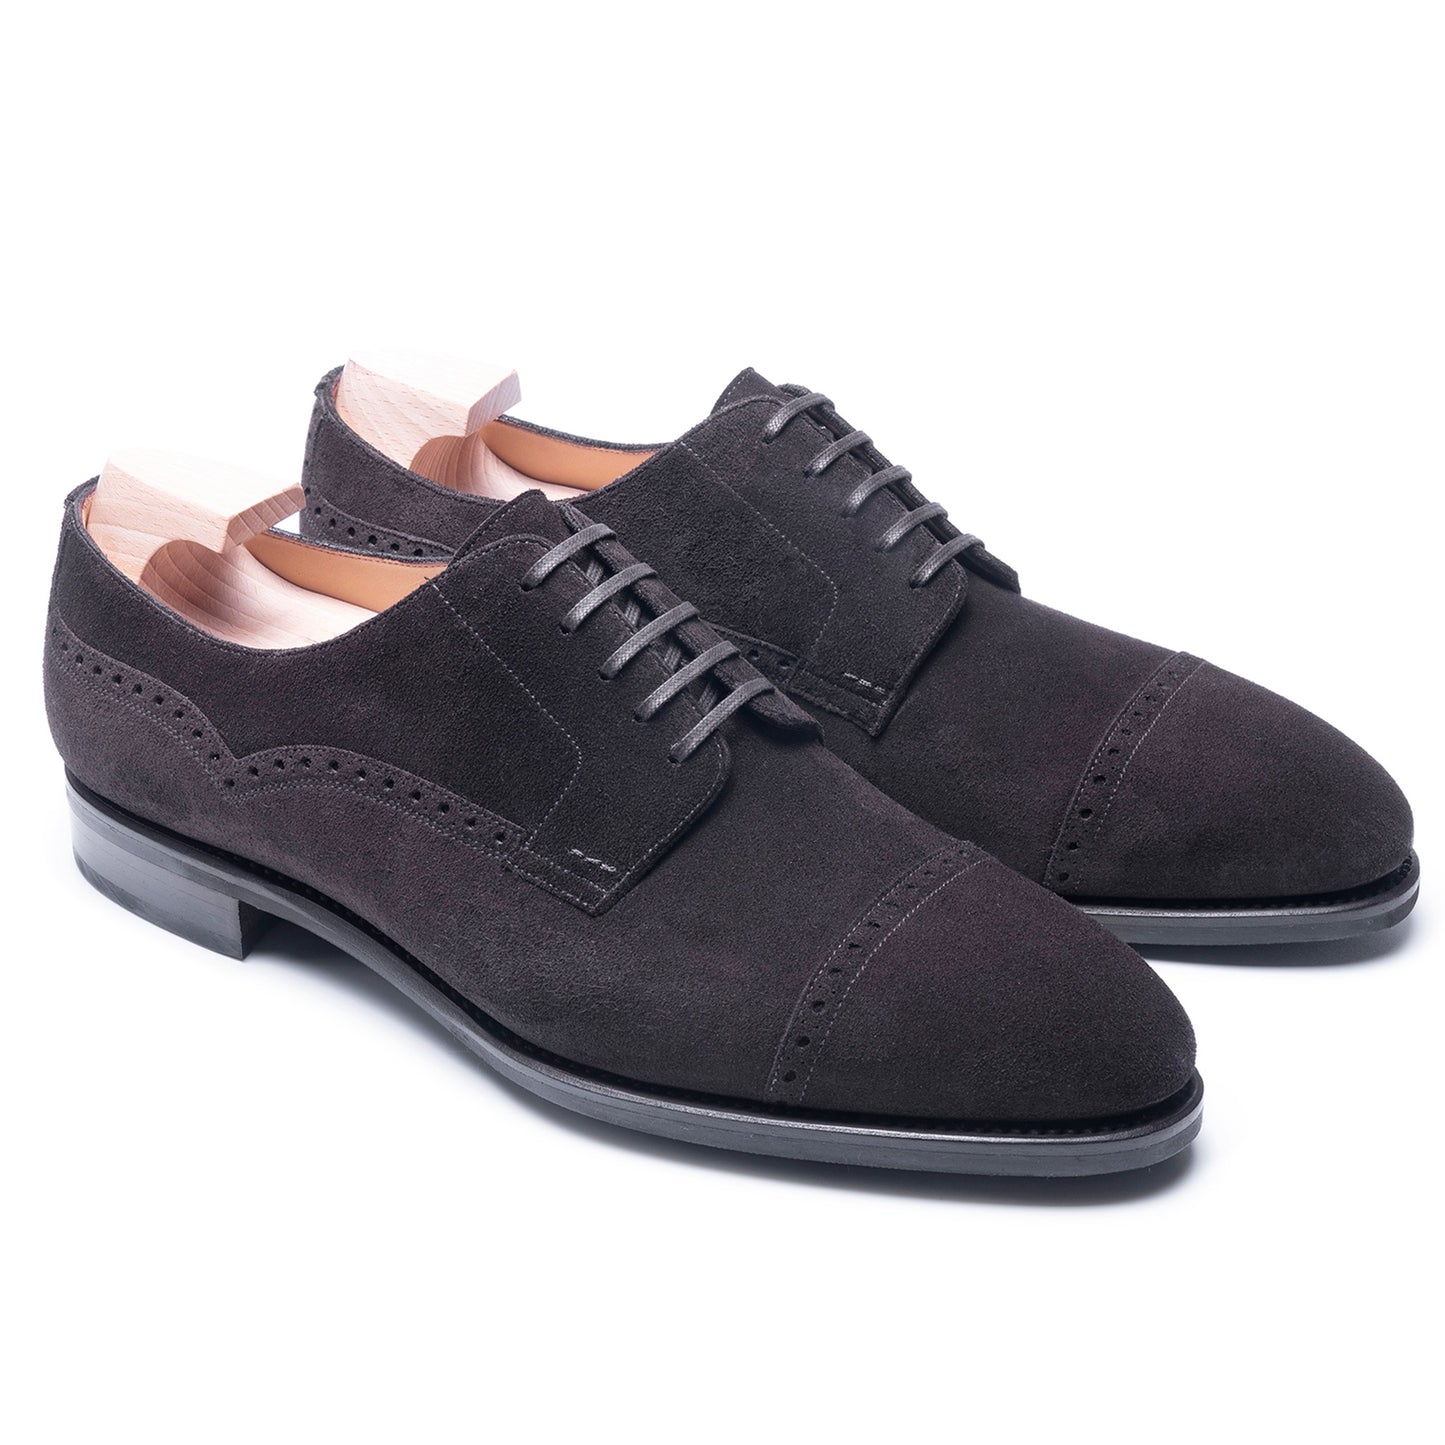 TLB Mallorca leather shoes 238 / GOYA / SUEDE BROWN